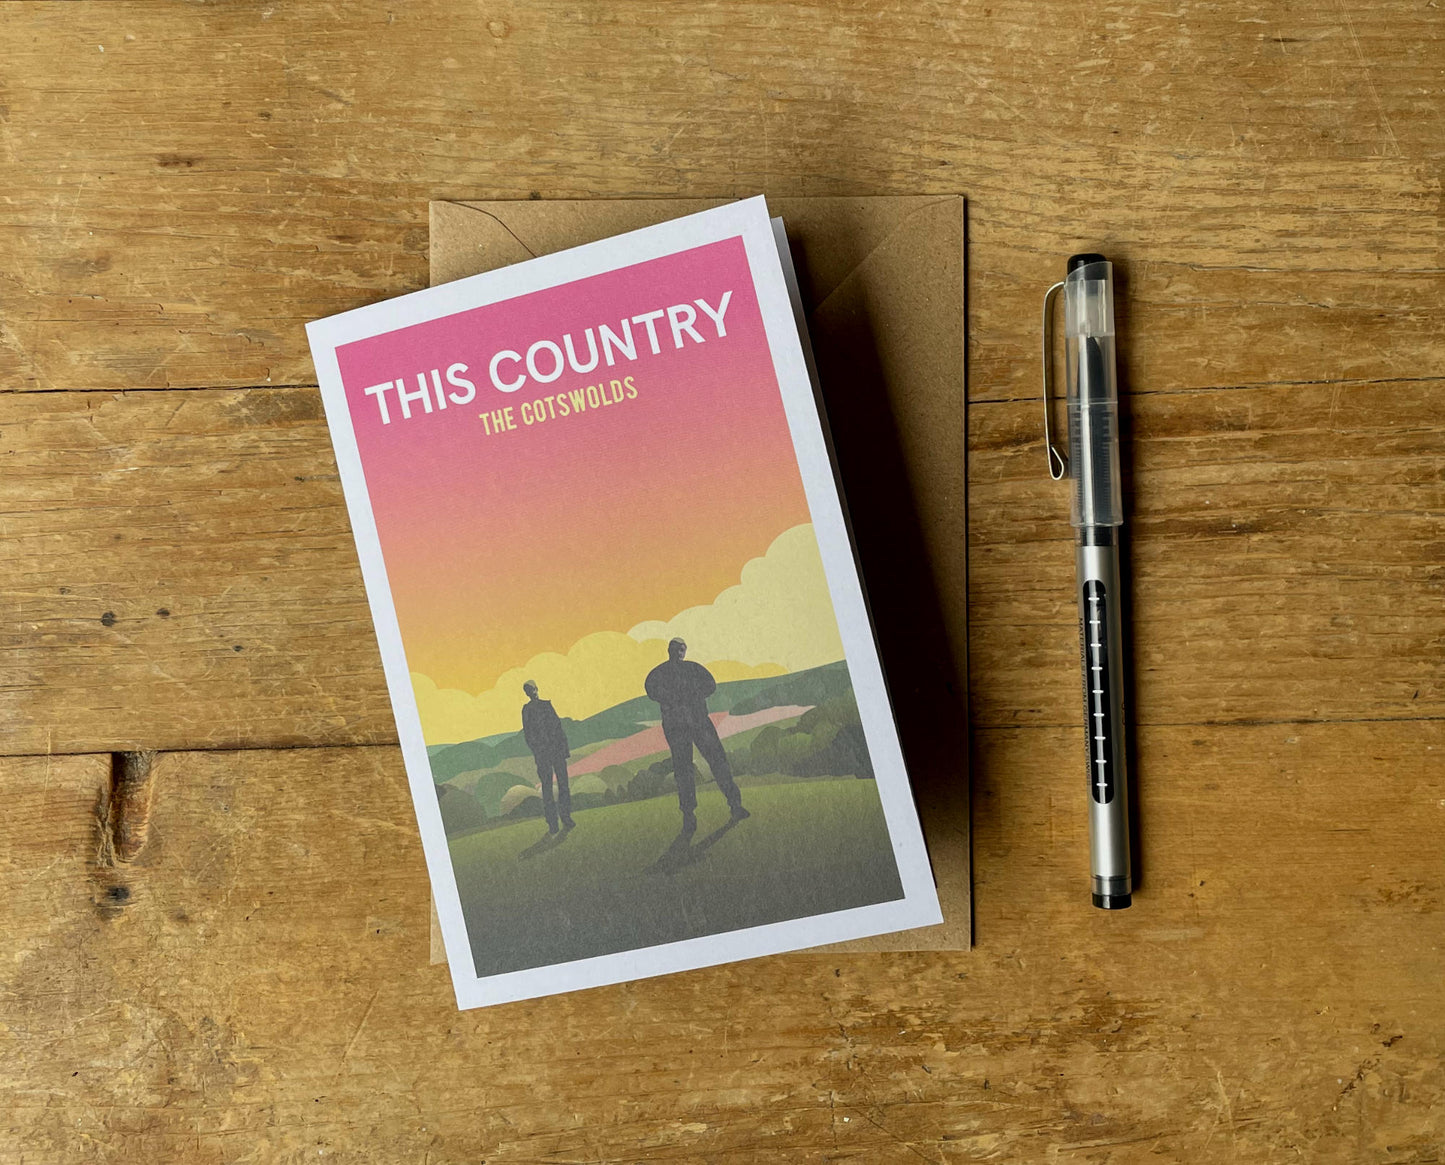 This Country Greeting Card on desk